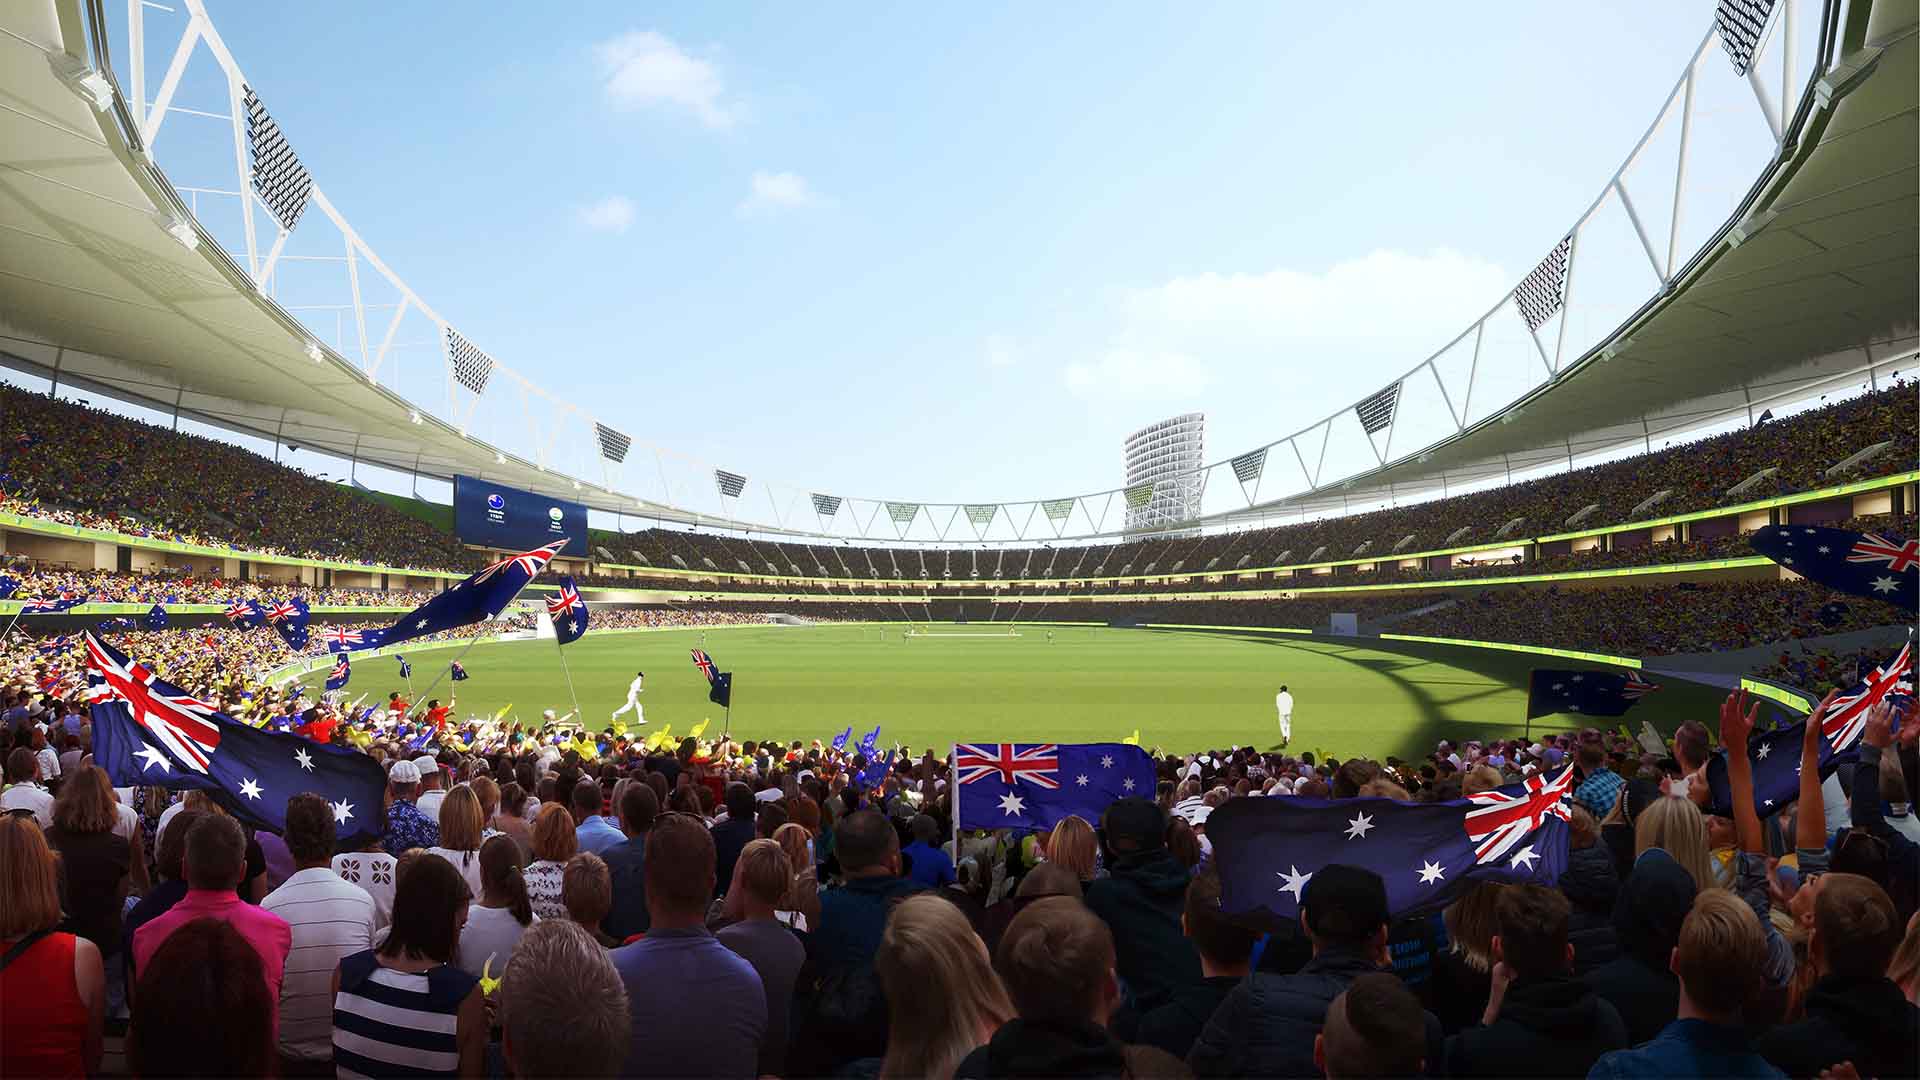 It's Official: The Gabba Will Be Demolished and Rebuilt for the 2032 Brisbane Olympics